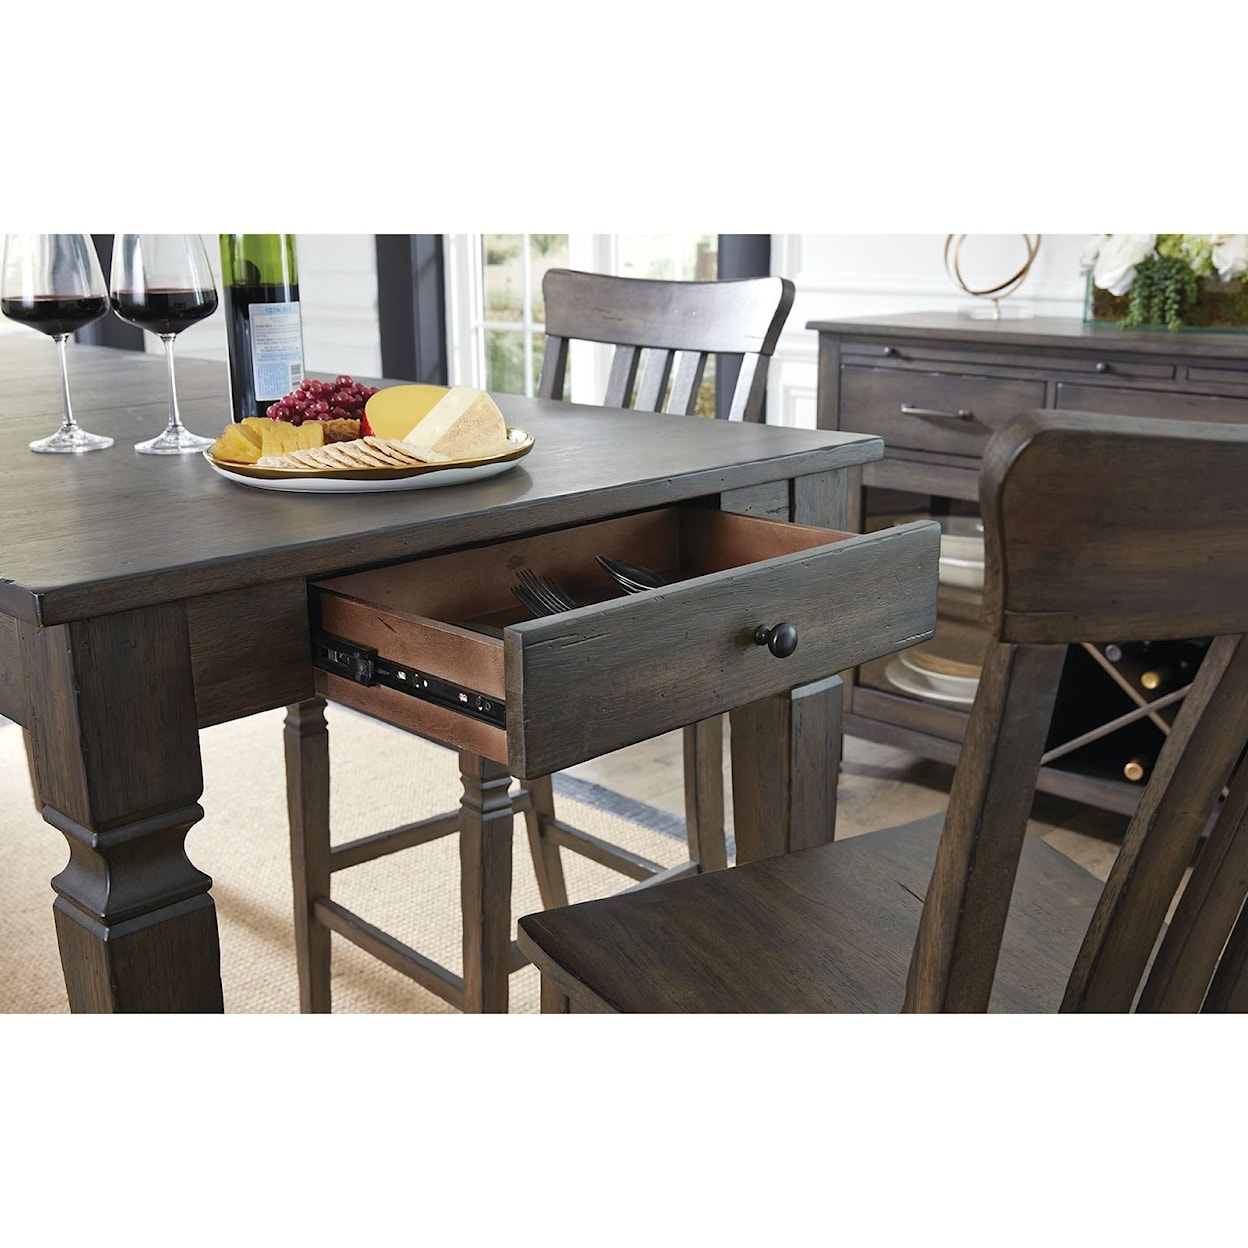 AAmerica Kingston 7-Piece Counter Height Table Set